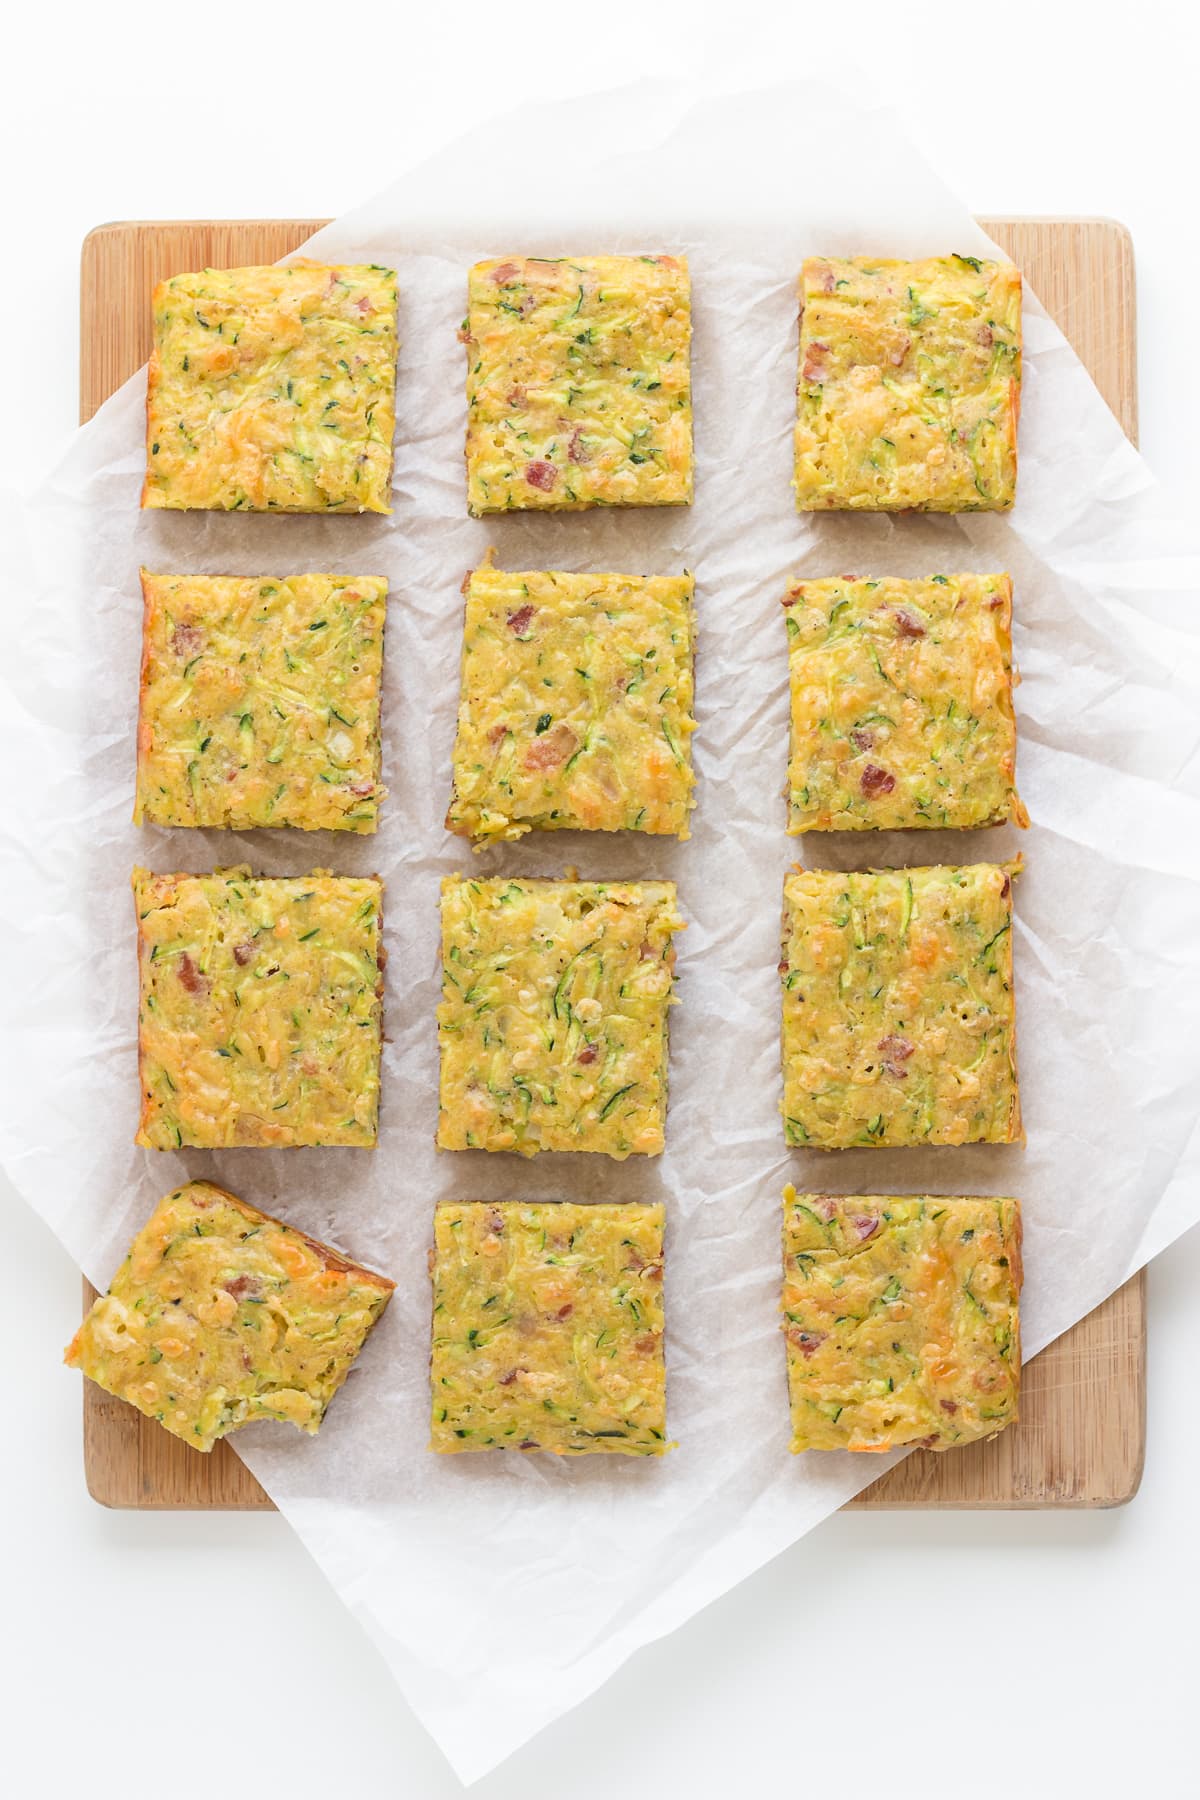 Square cut up pieces of zucchini slice on a wooden board lined with parchment paper.